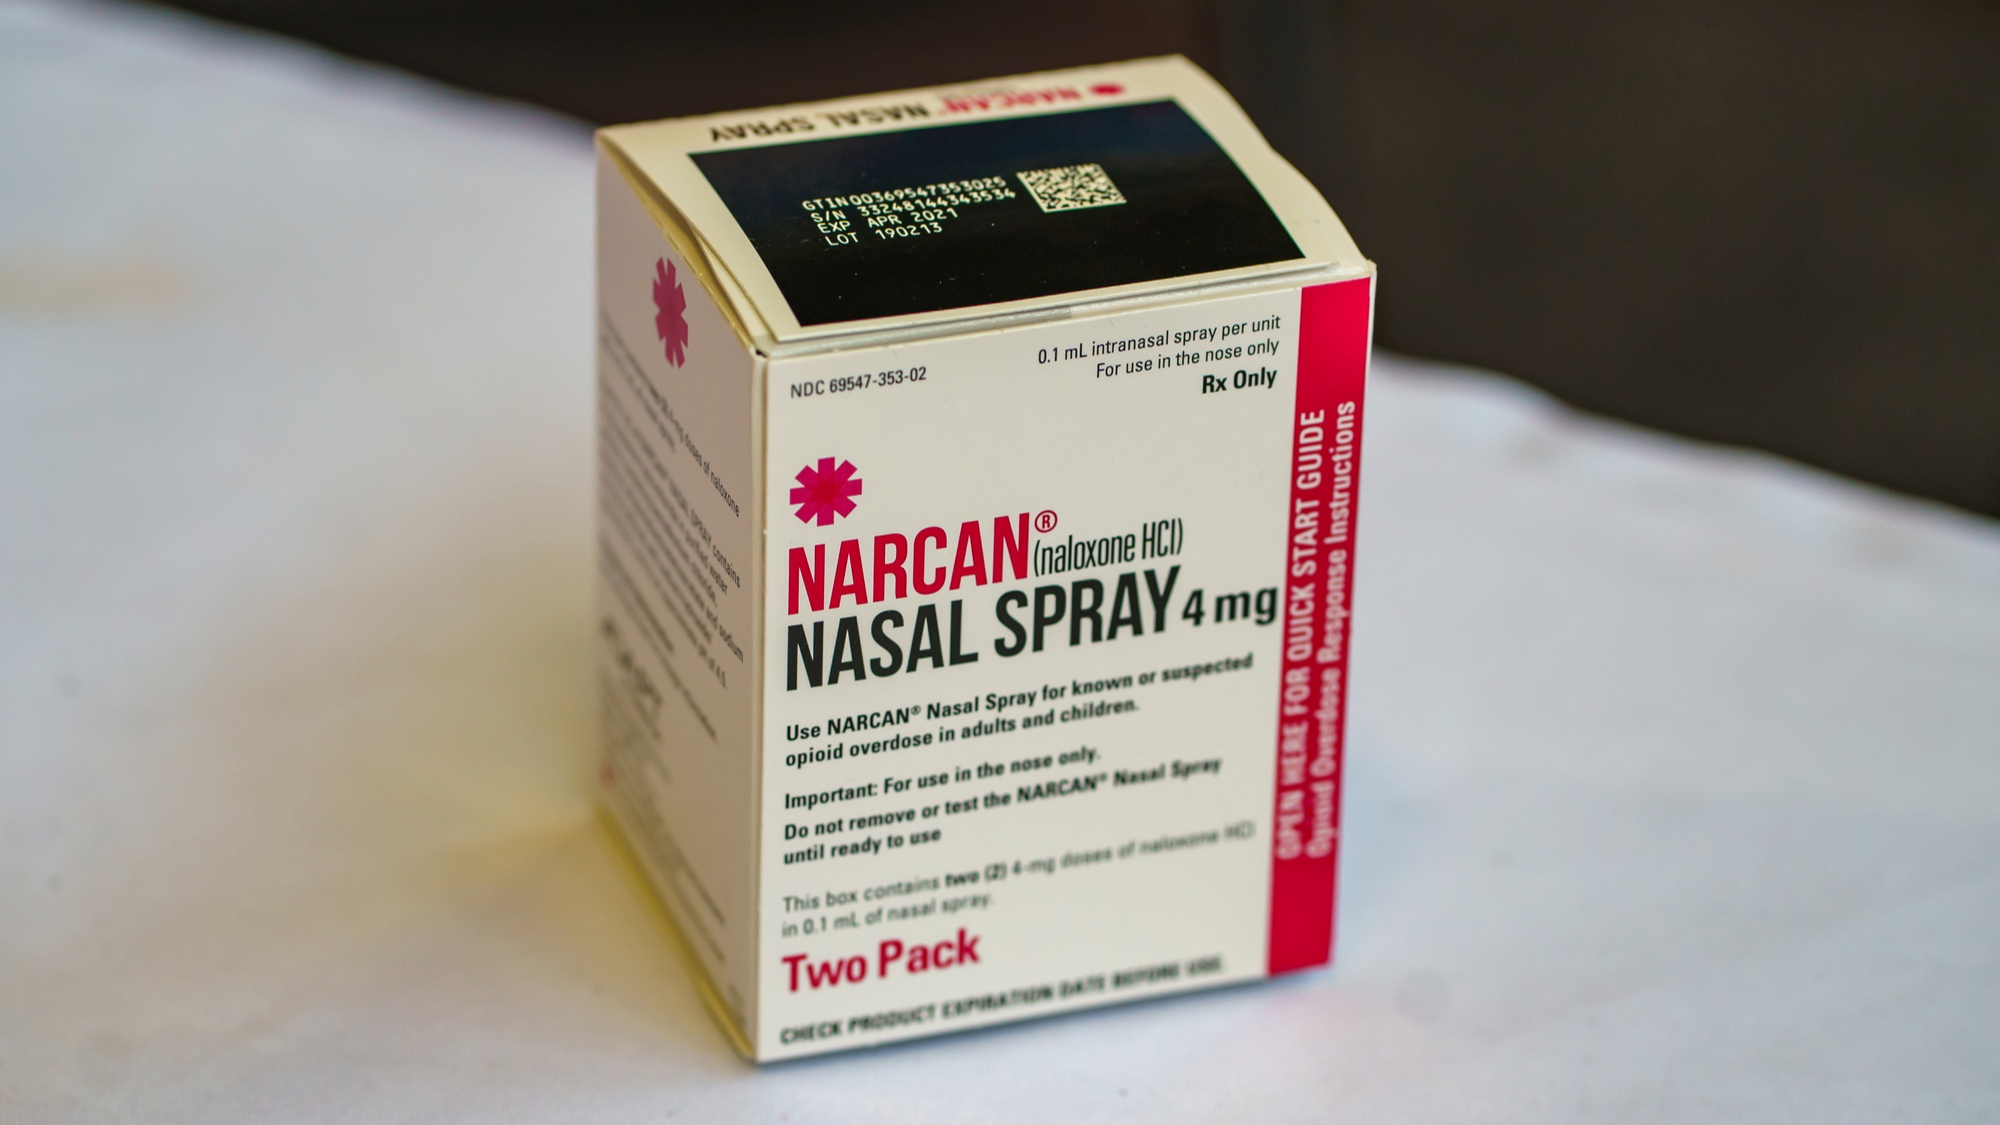 Colorado has had a program that allows schools to obtain Narcan, typically in nasal spray form, for free or at a reduced cost.